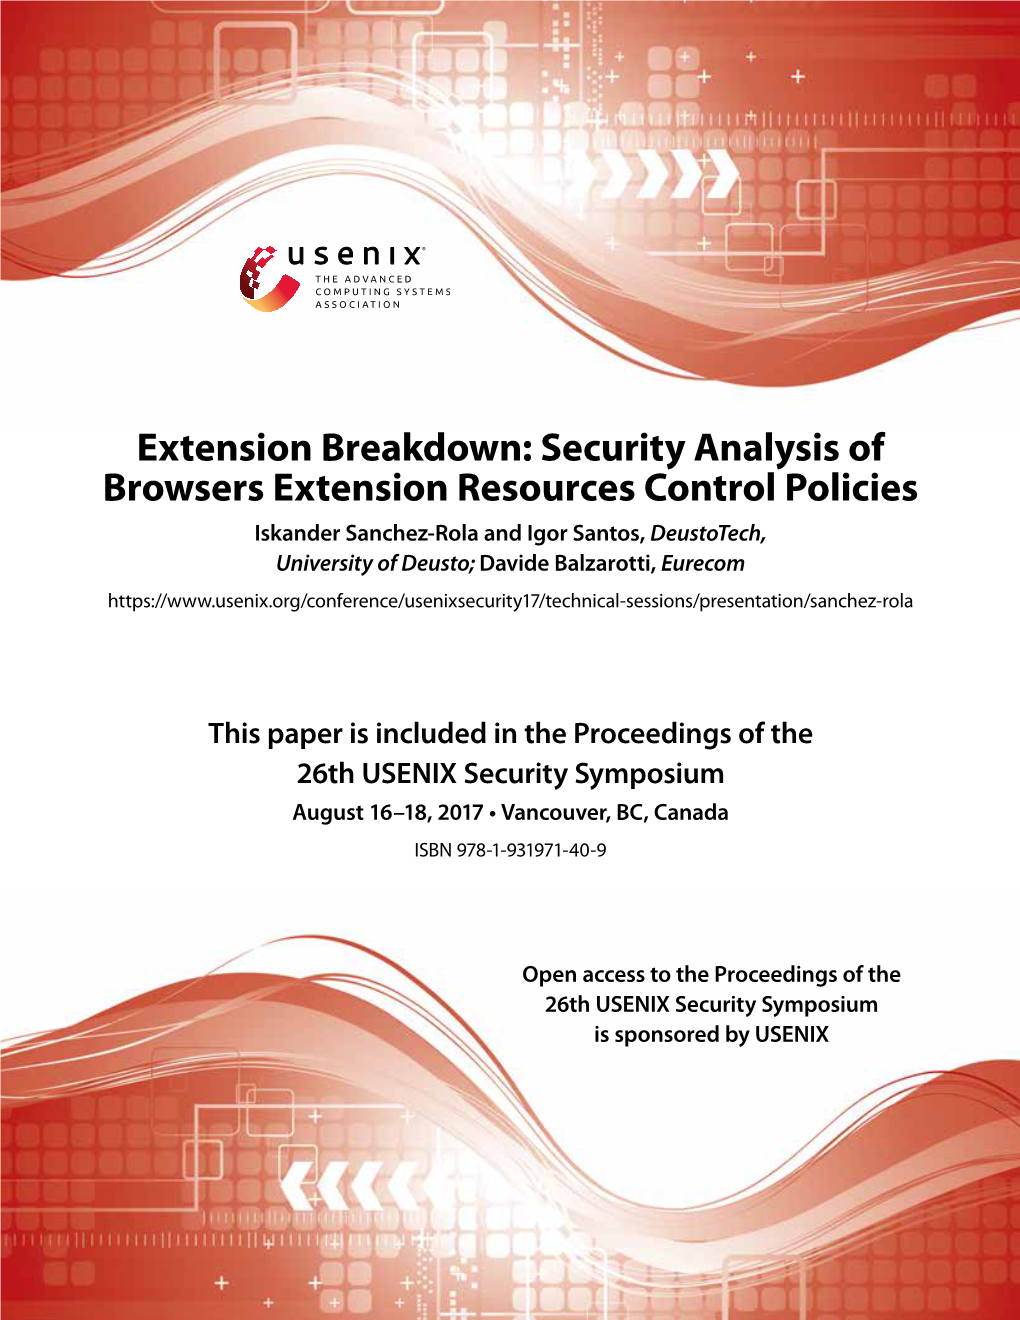 Security Analysis of Browsers Extension Resources